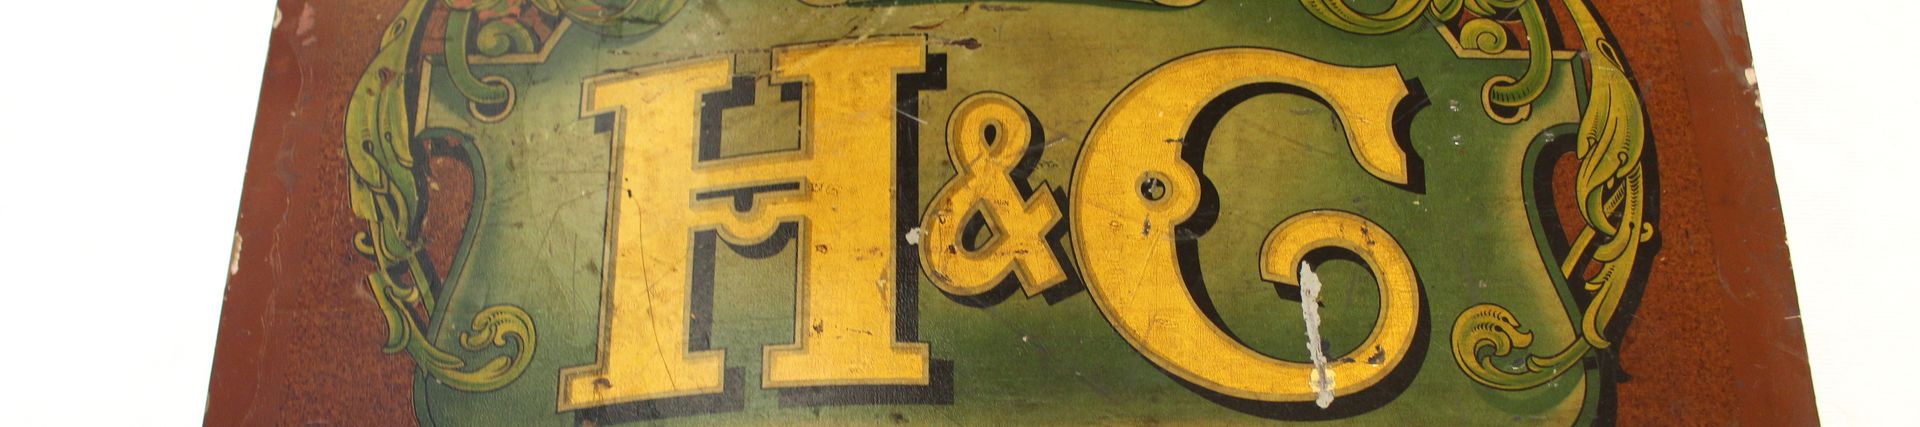 Hammersmith & City logo from timber carriage 